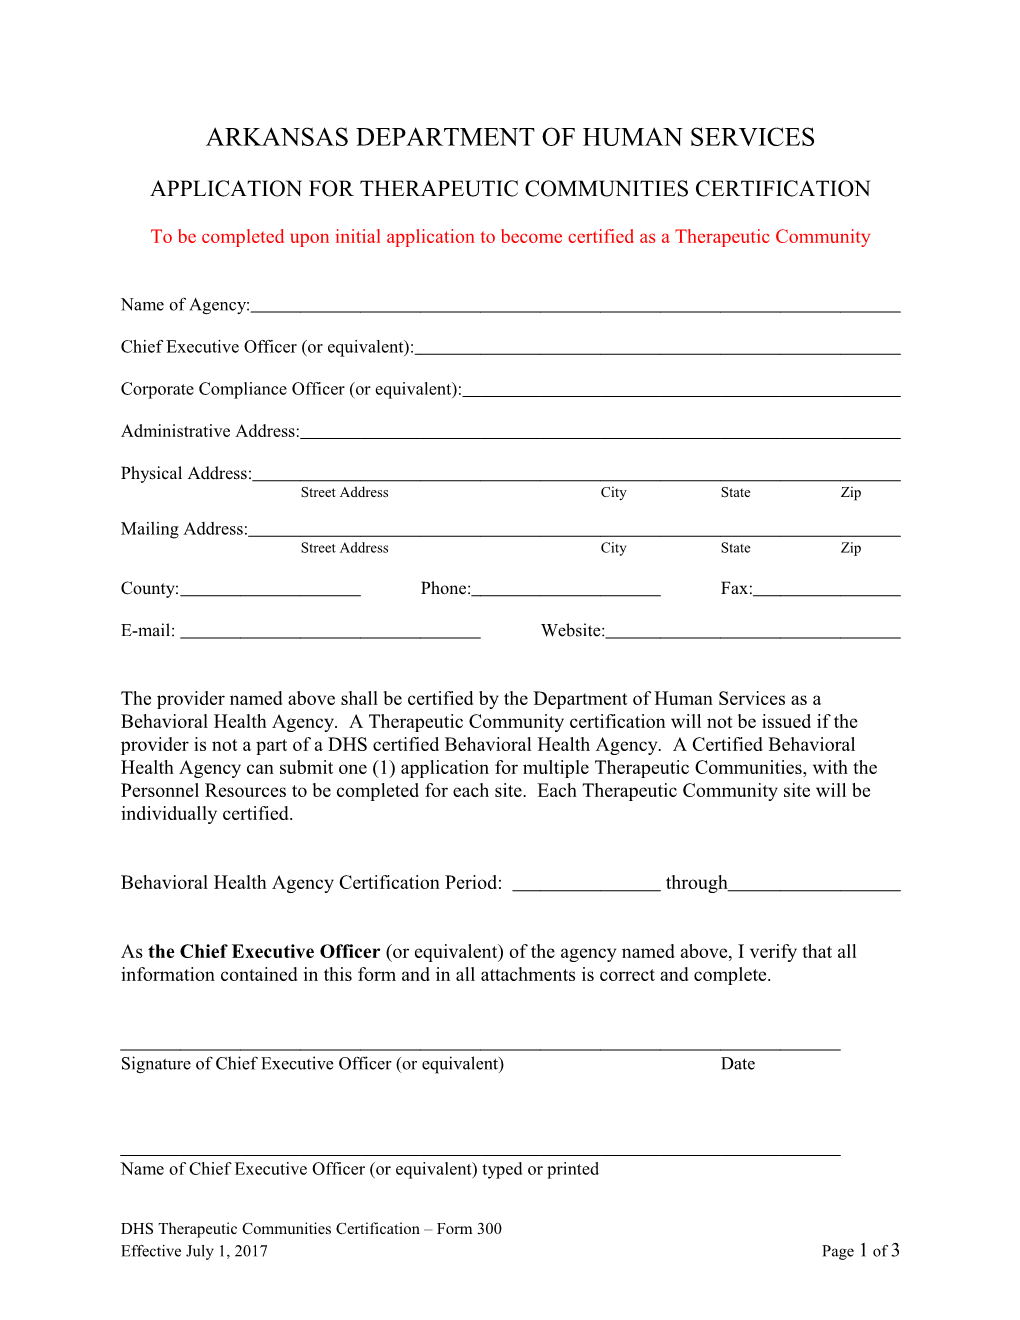 DHS THERAPUETIC COMMUNITIES CERTIFICATION Form 300